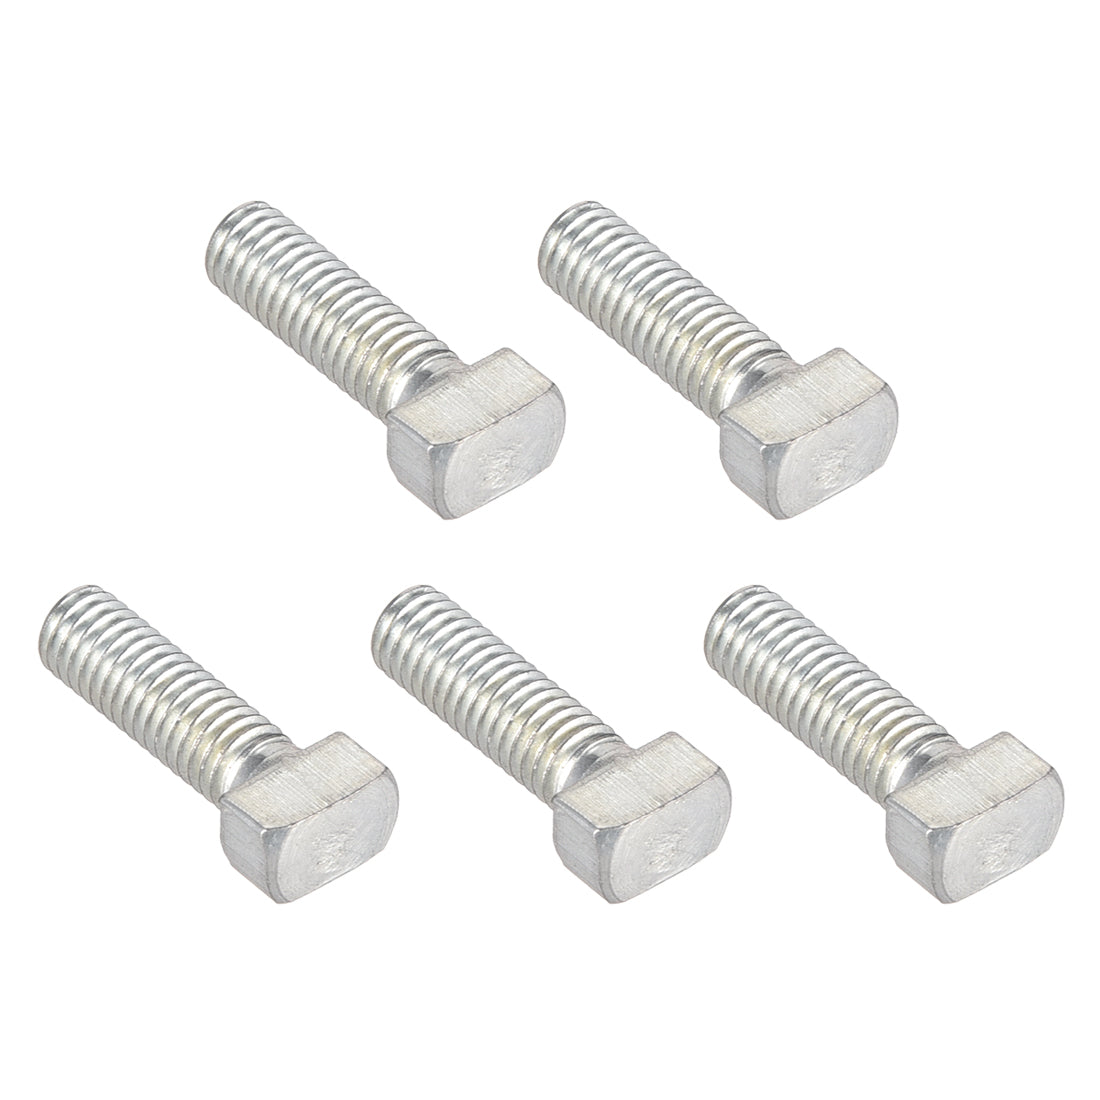 uxcell Uxcell M6 x 20mm T-Slot Drop-In Stud Screw Bolt Carbon Steel ISO 30 Series 5pcs